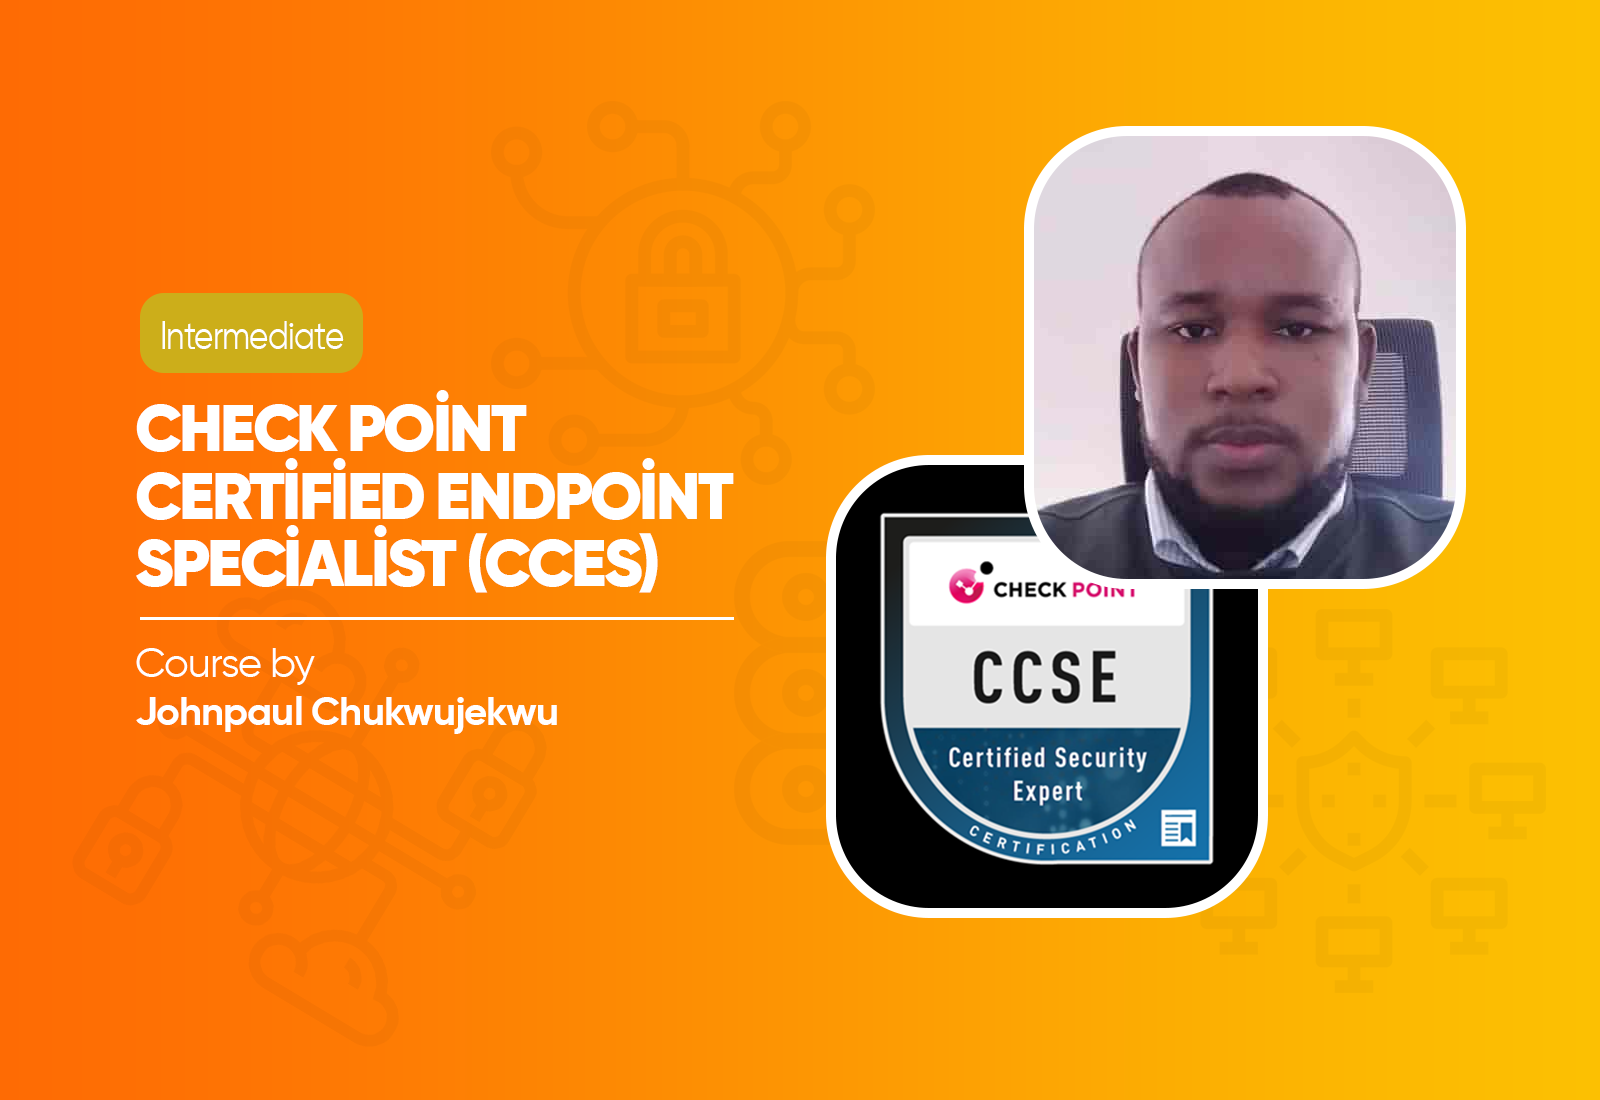 Check Point Certified Endpoint Specialist (CCES) Course